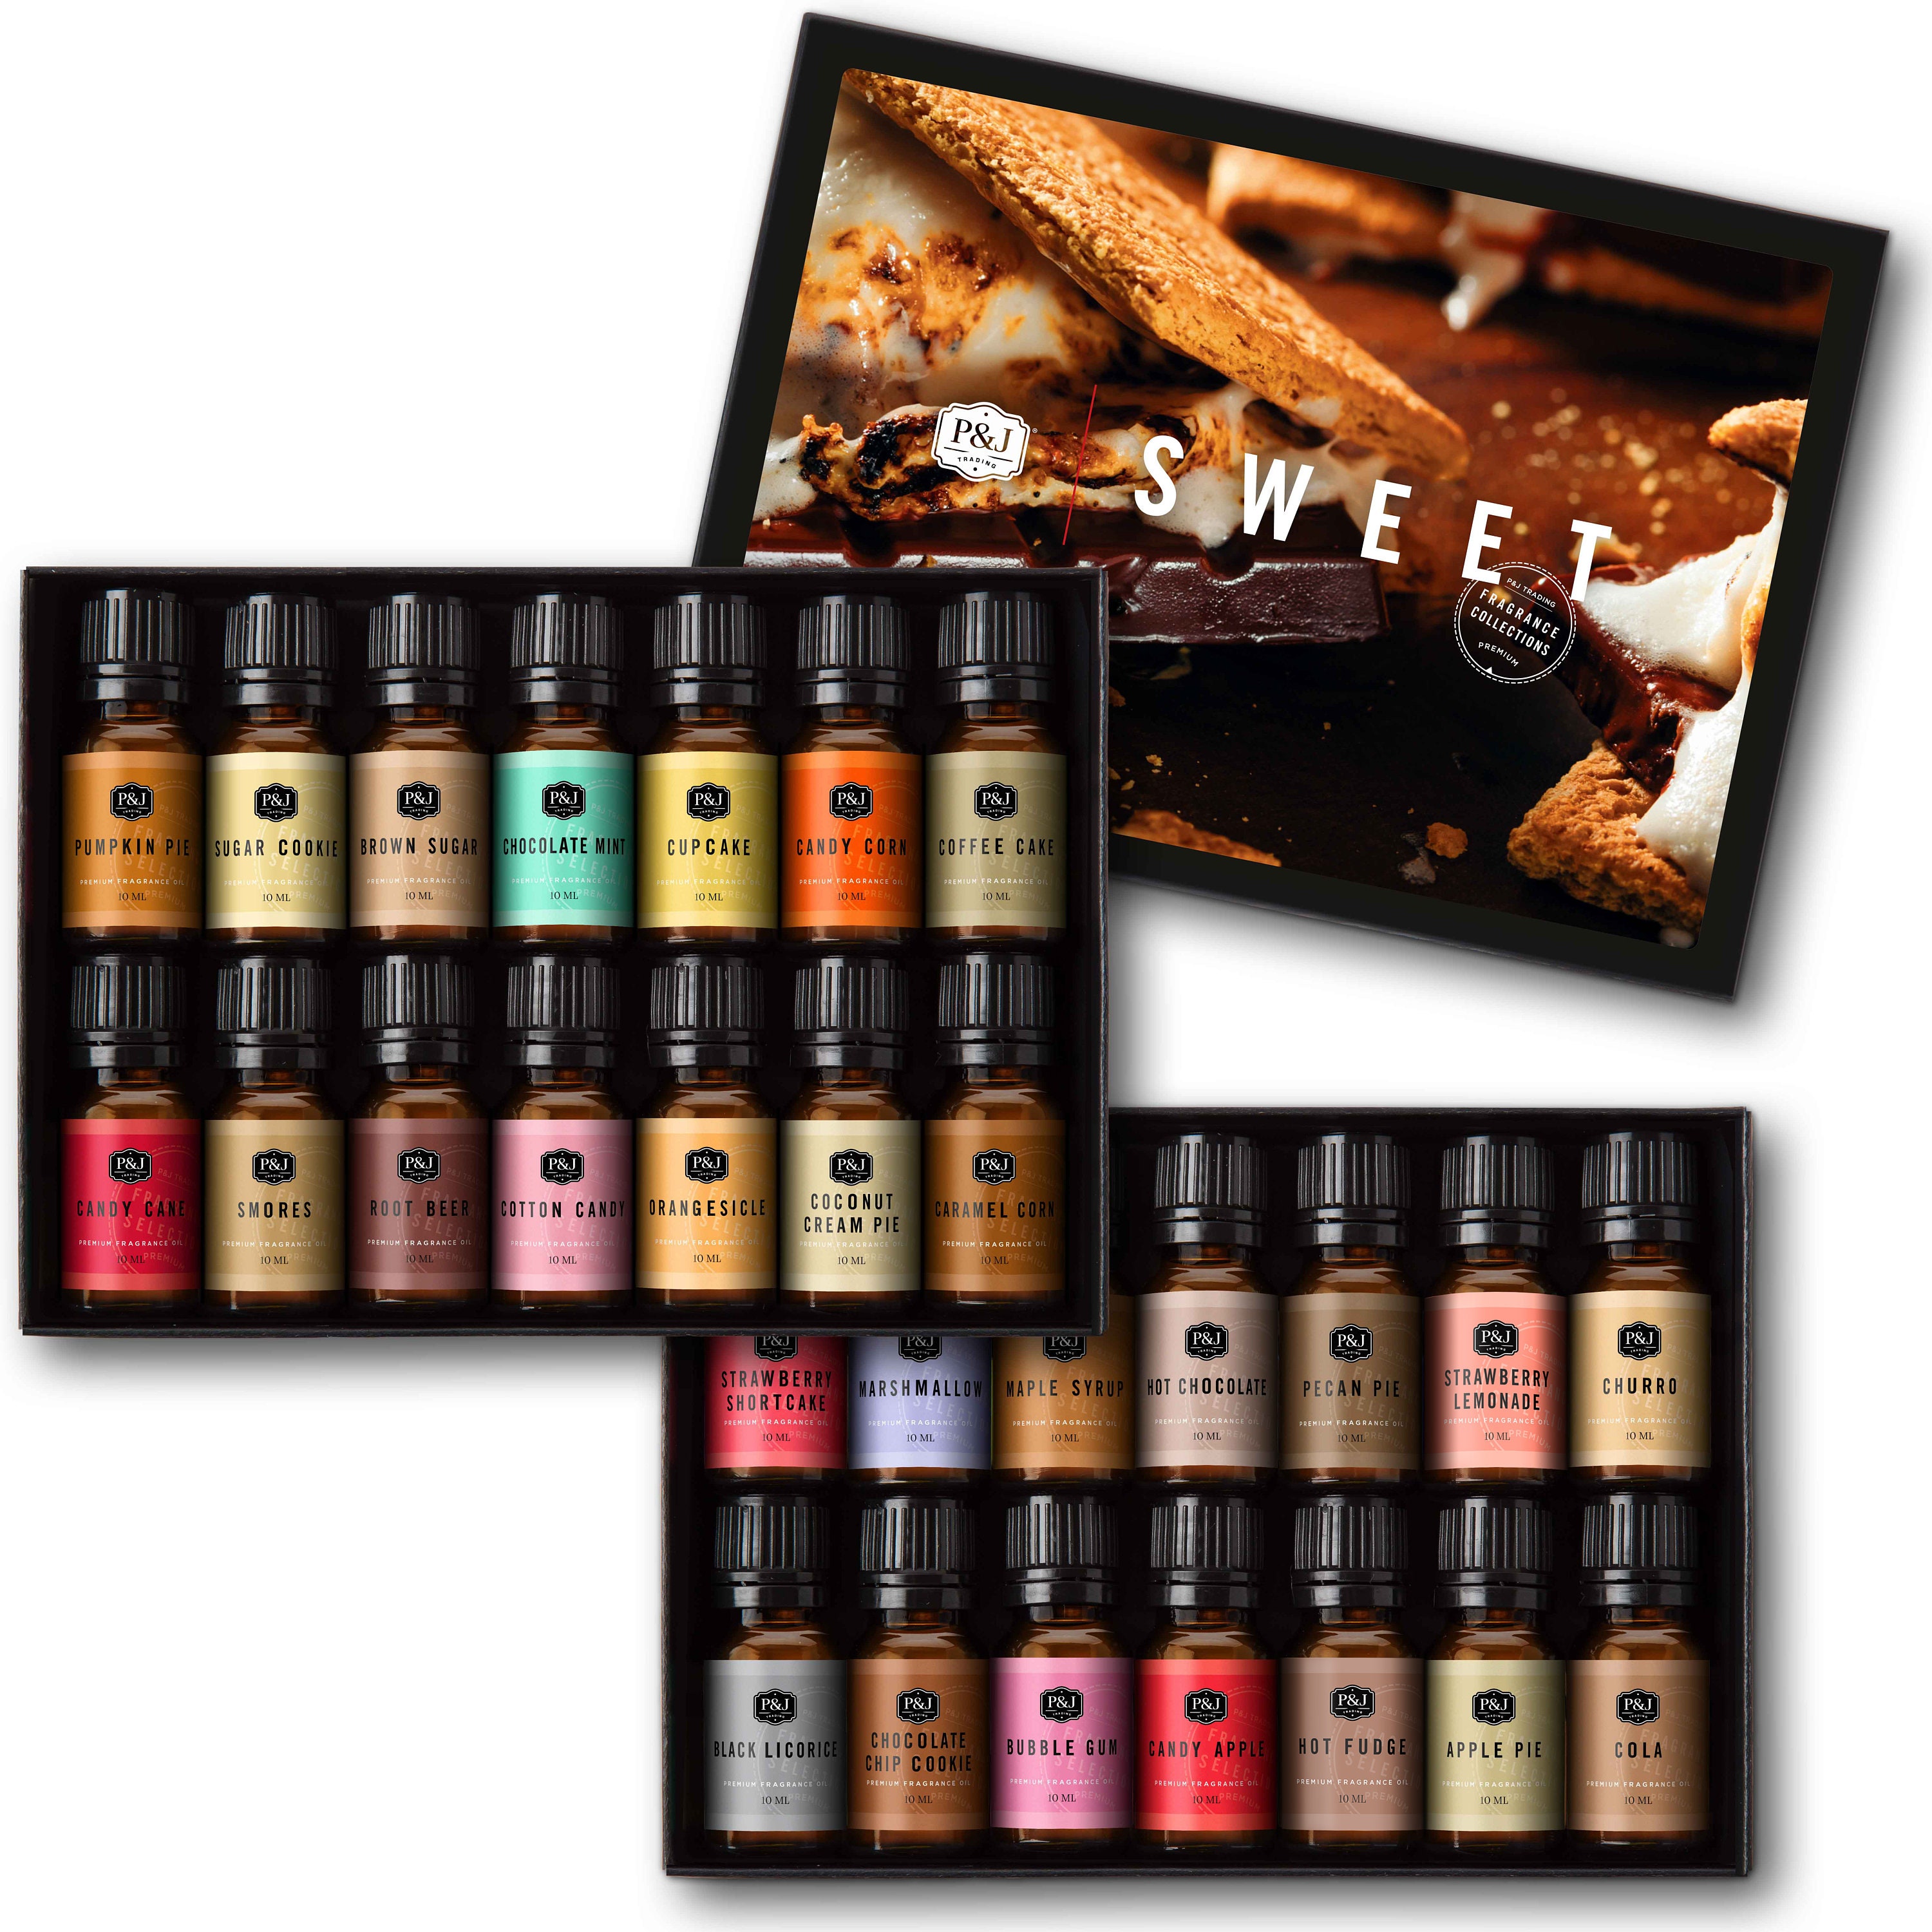 P&J Trading Fragrance Essential Oils Set Autumn Fall Scents